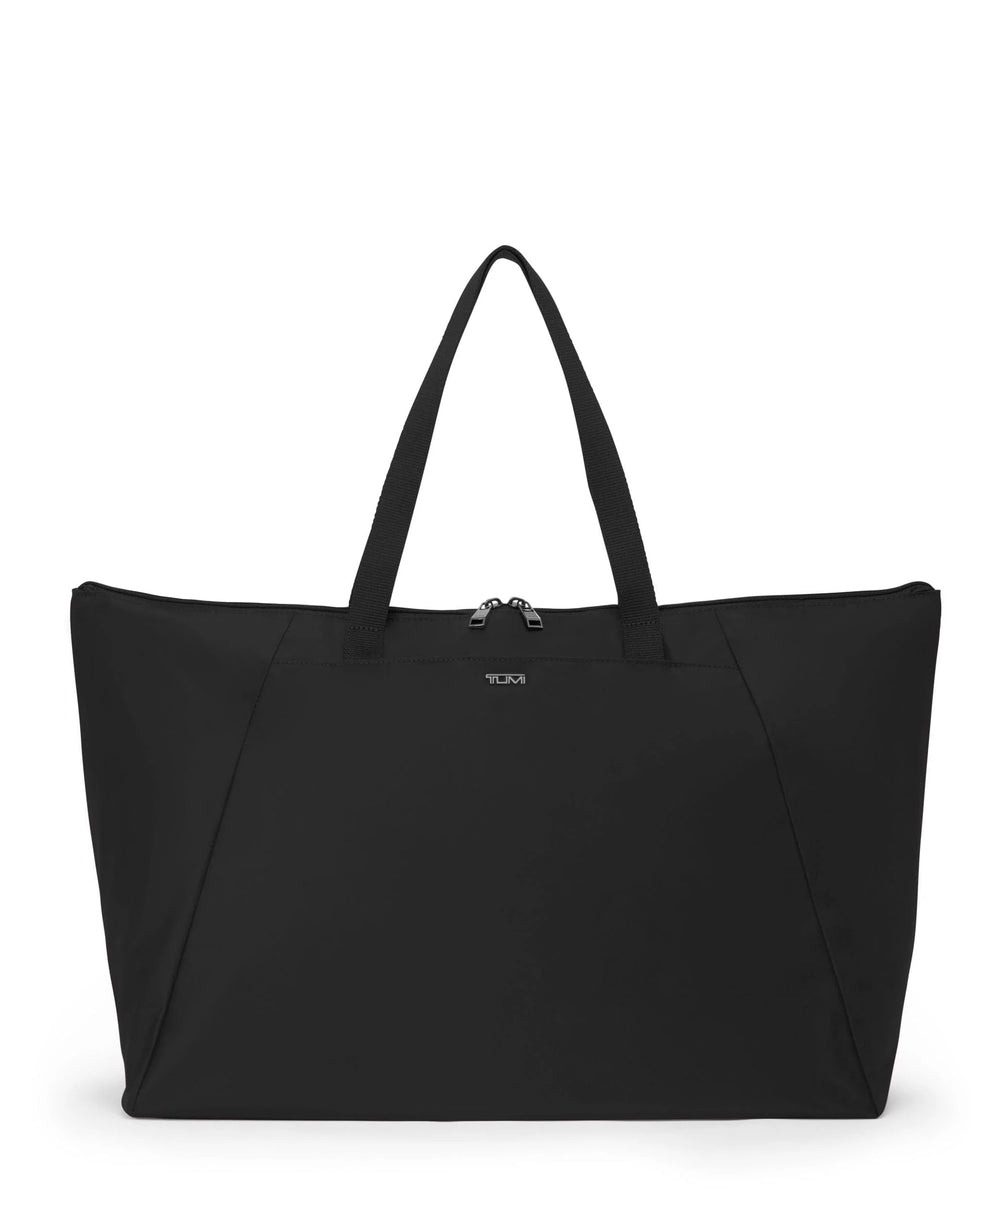 Just In Case Tote Voyageur Collection